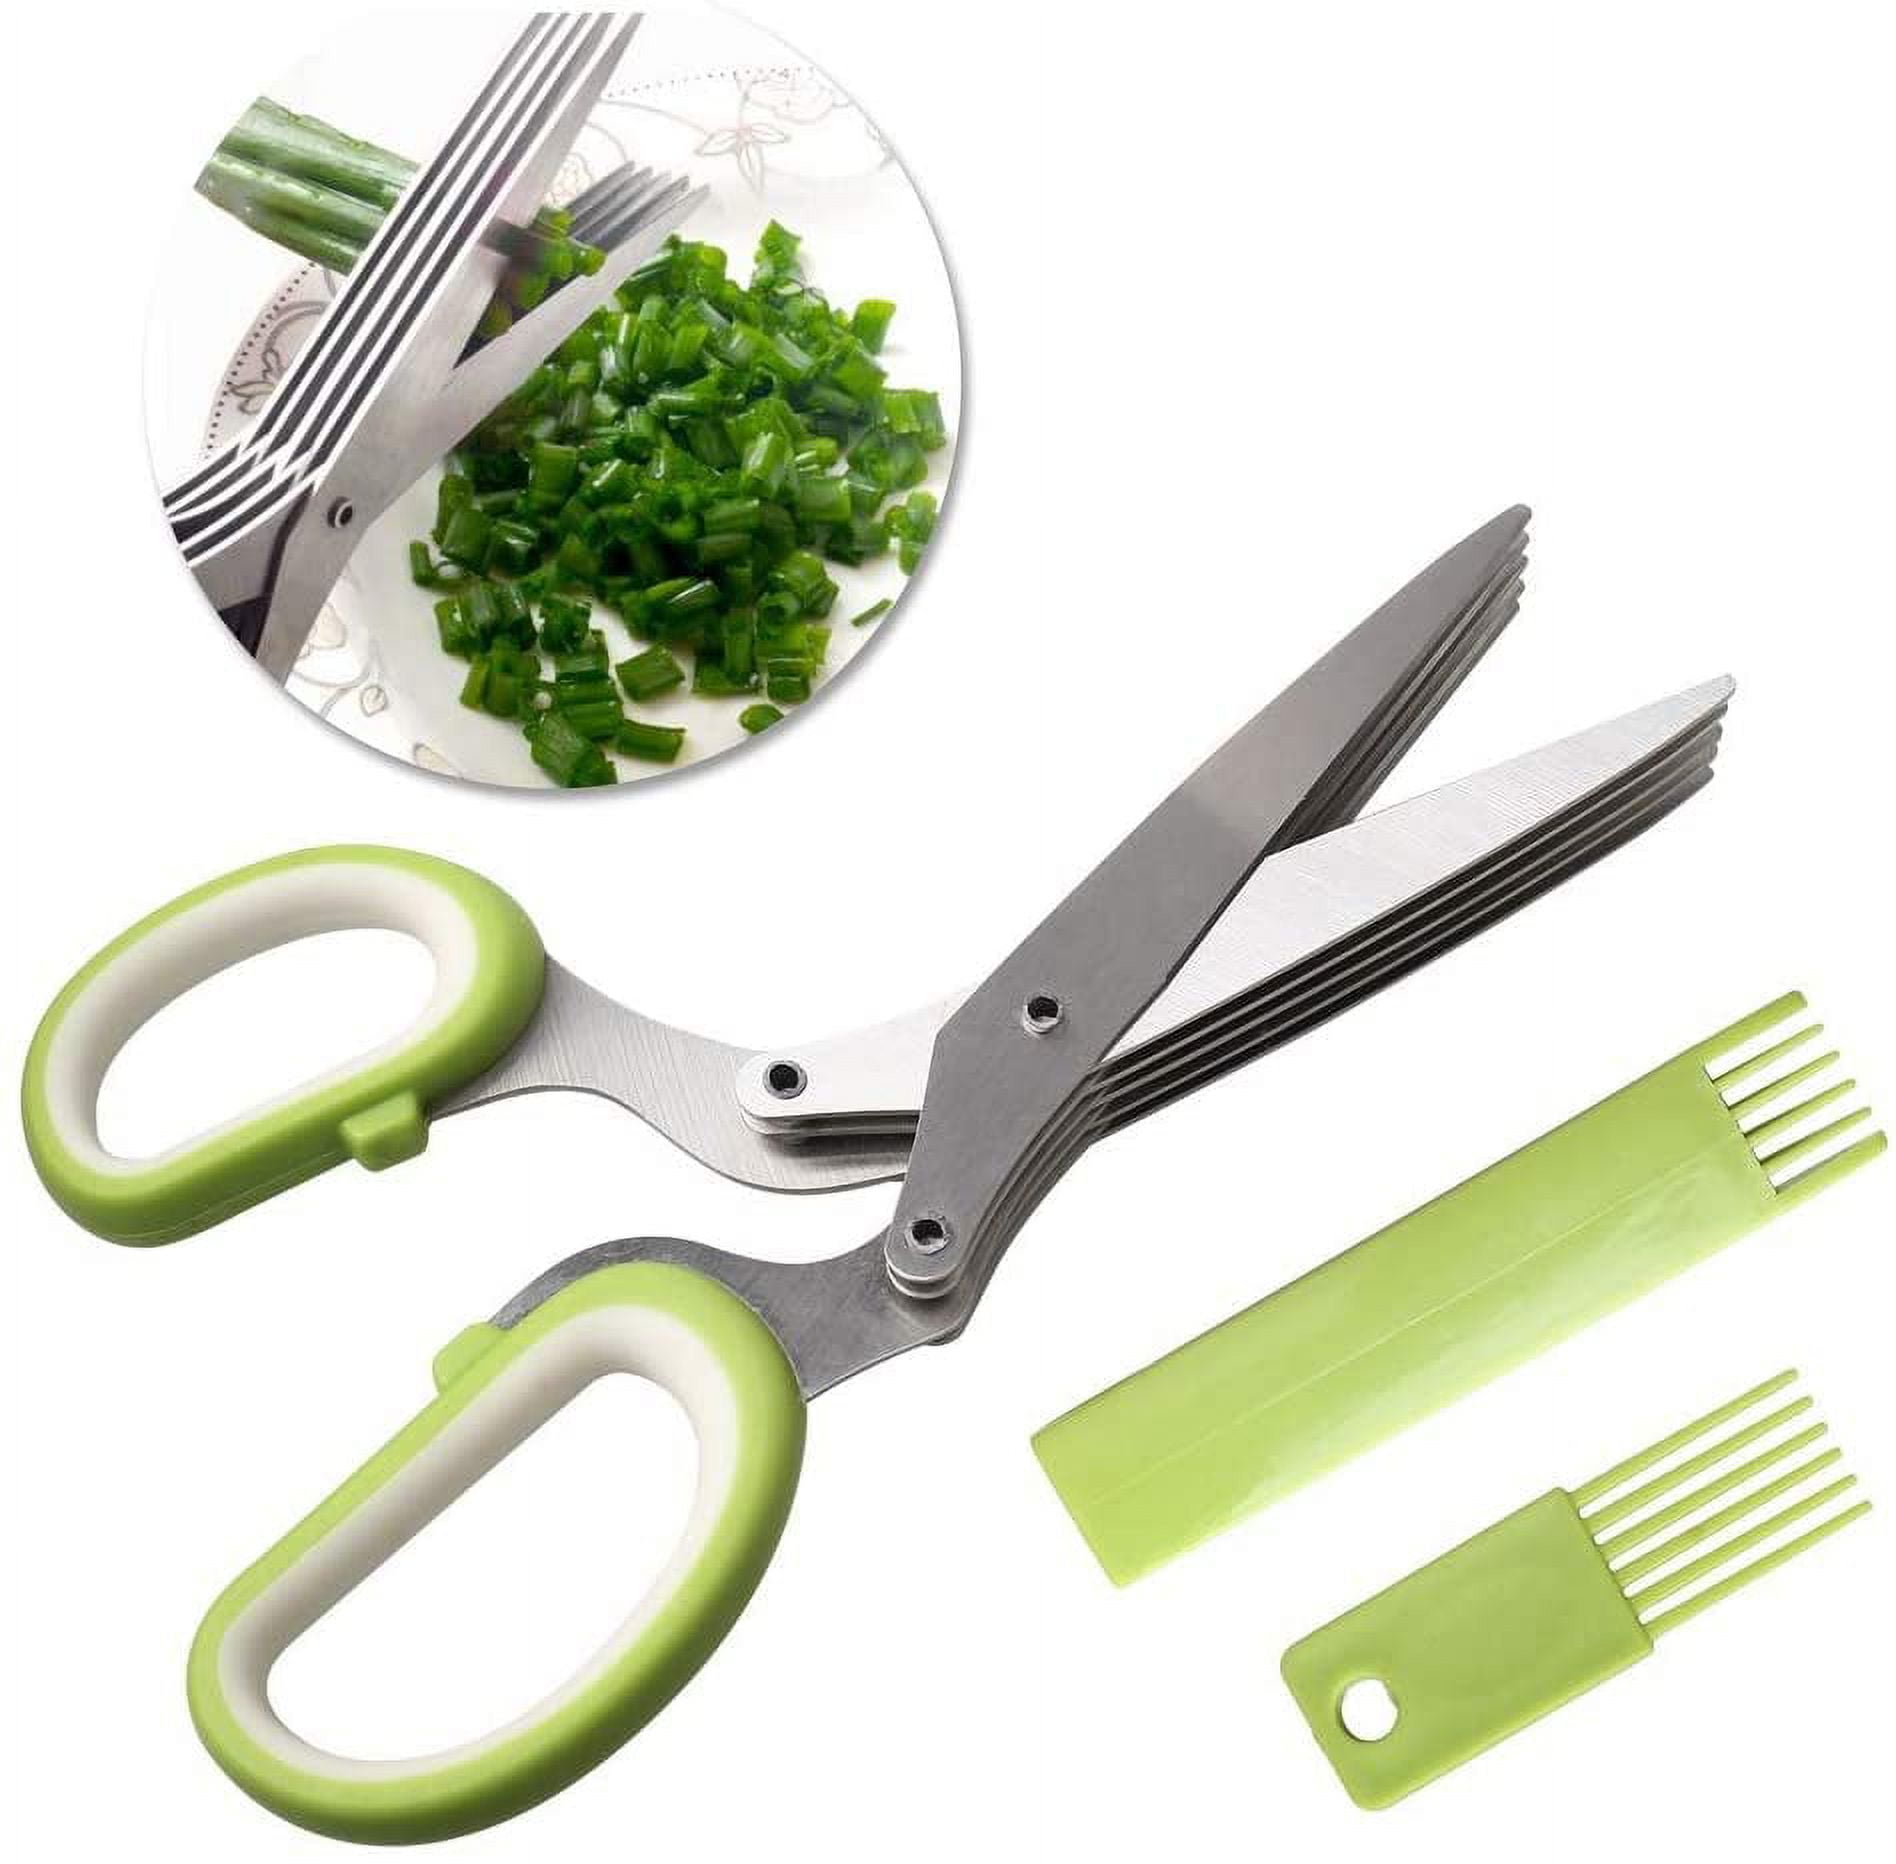 Herb Scissors Set Cool Kitchen Gadgets Gifts Kitchen Shears Scissors with  Stainless Steel 5 Blades+Cover+Brush,Rust Proof,Sharp Cutting Garden Herb  Garlic Leafy Greens Paper Shredding,Dishwasher Safe 